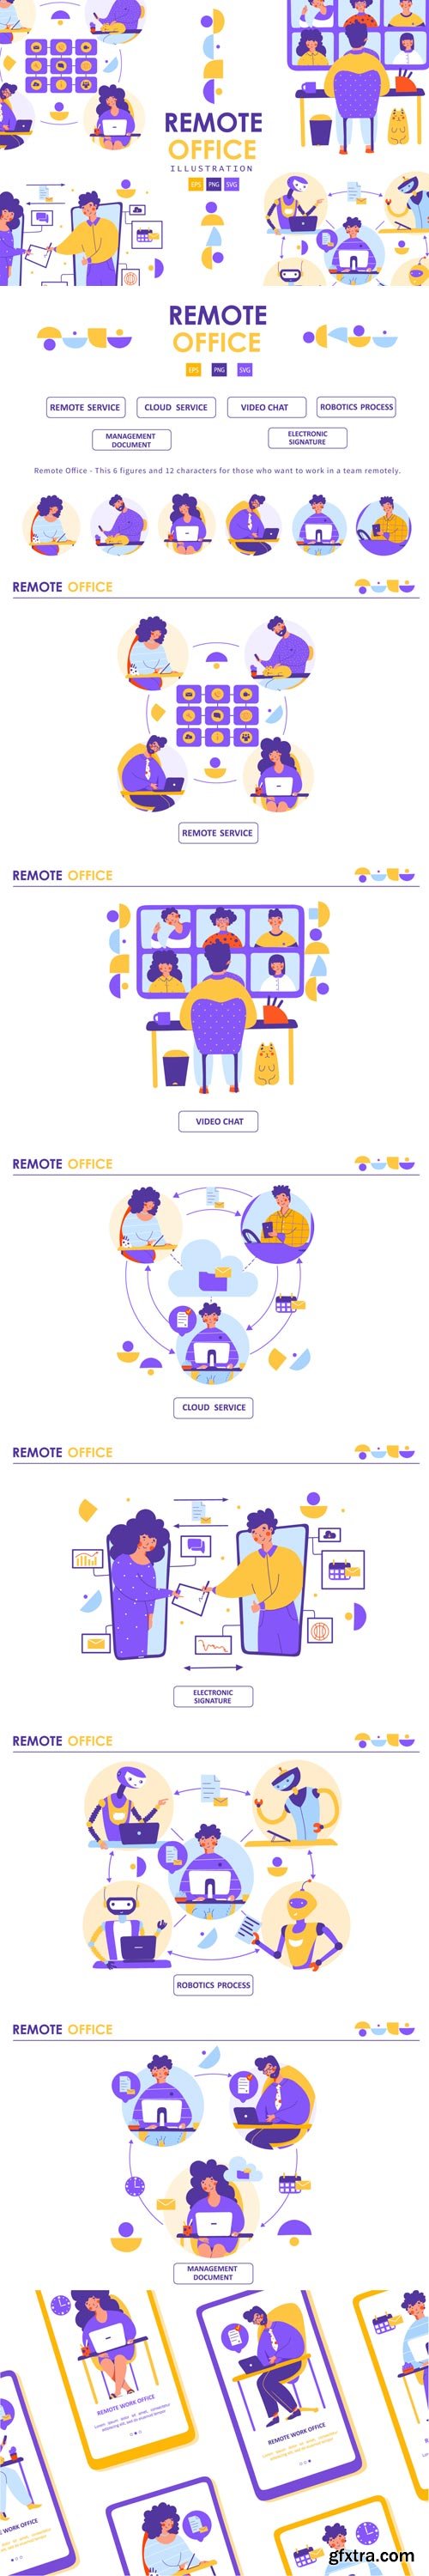 YellowImages - Remote Office - illustration - 83525